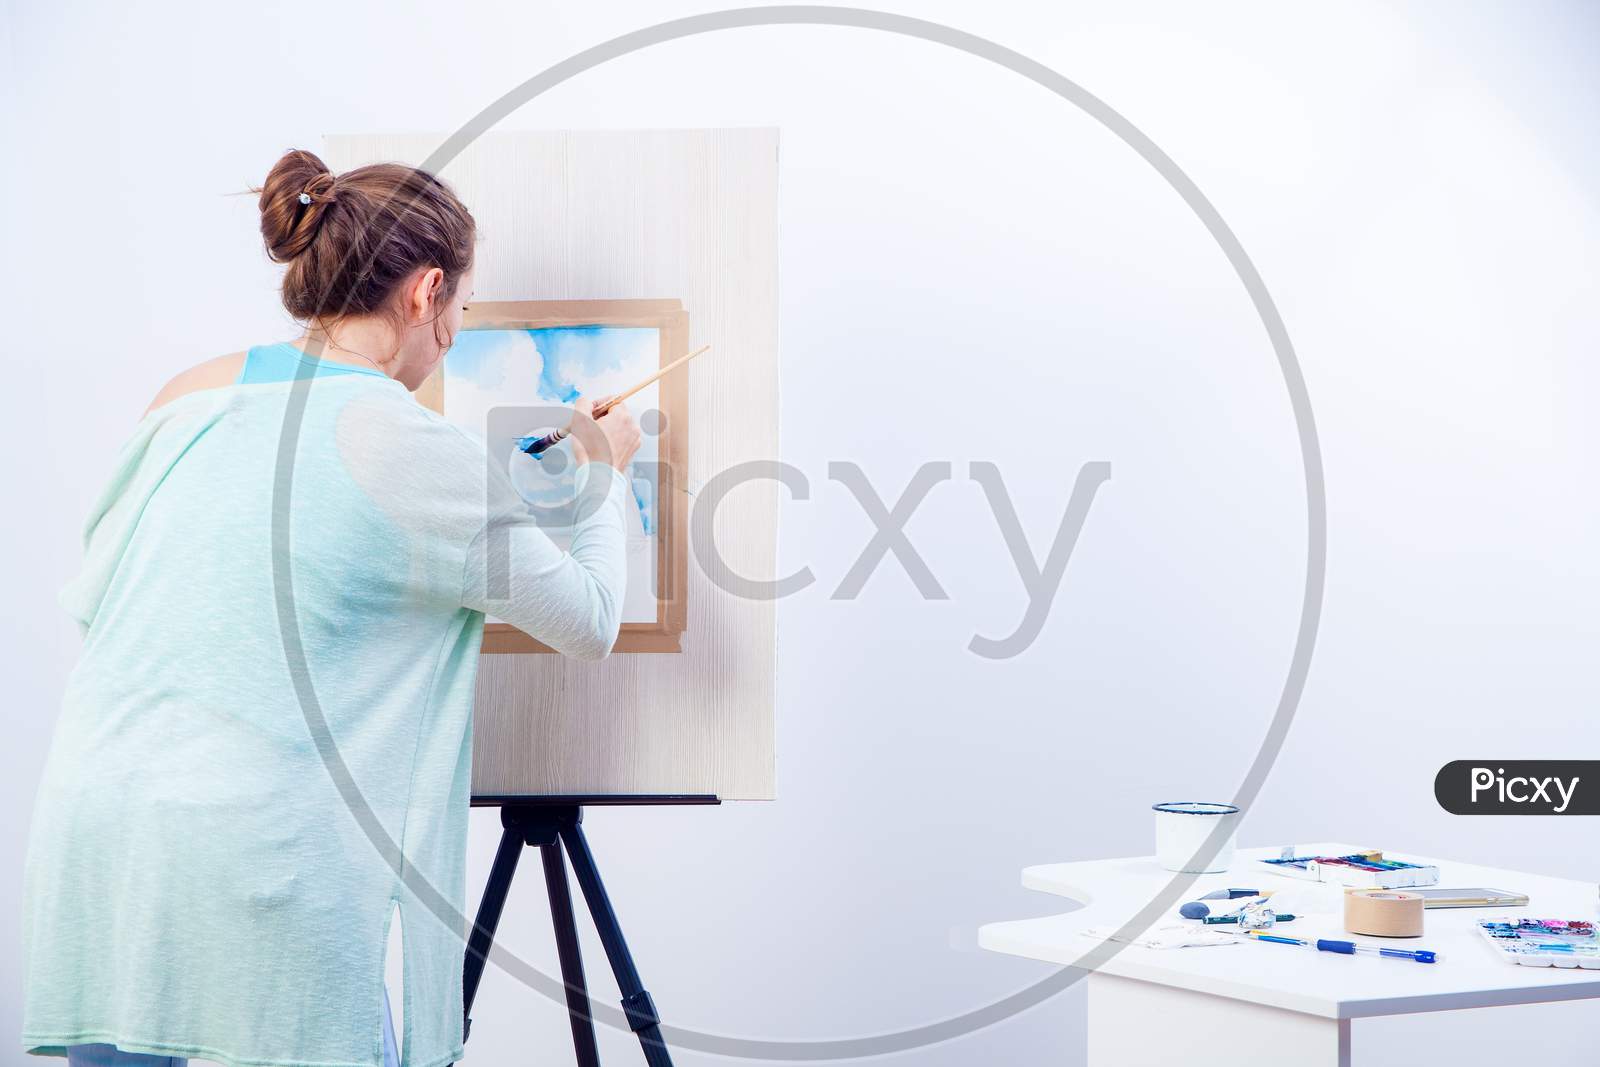 Young Dark-Haired Woman Artist In Blue Sweater Paints With Watercolor And Wooden Brush On White Paper Seascape With Single-Deck Yacht